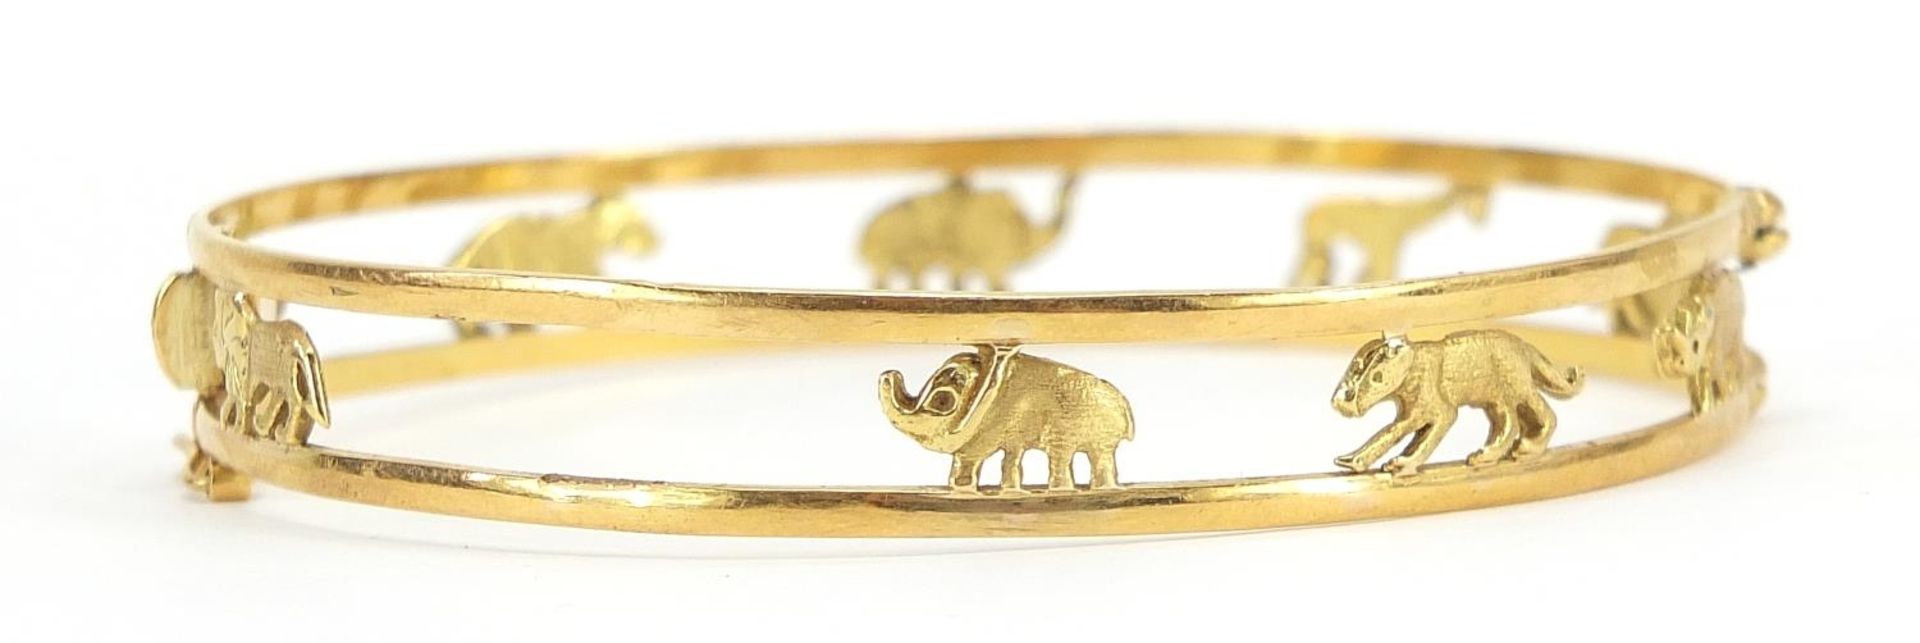 18ct gold hinged bangle pierced with animals including lion, giraffe, elephant and rhino, housed - Image 2 of 5